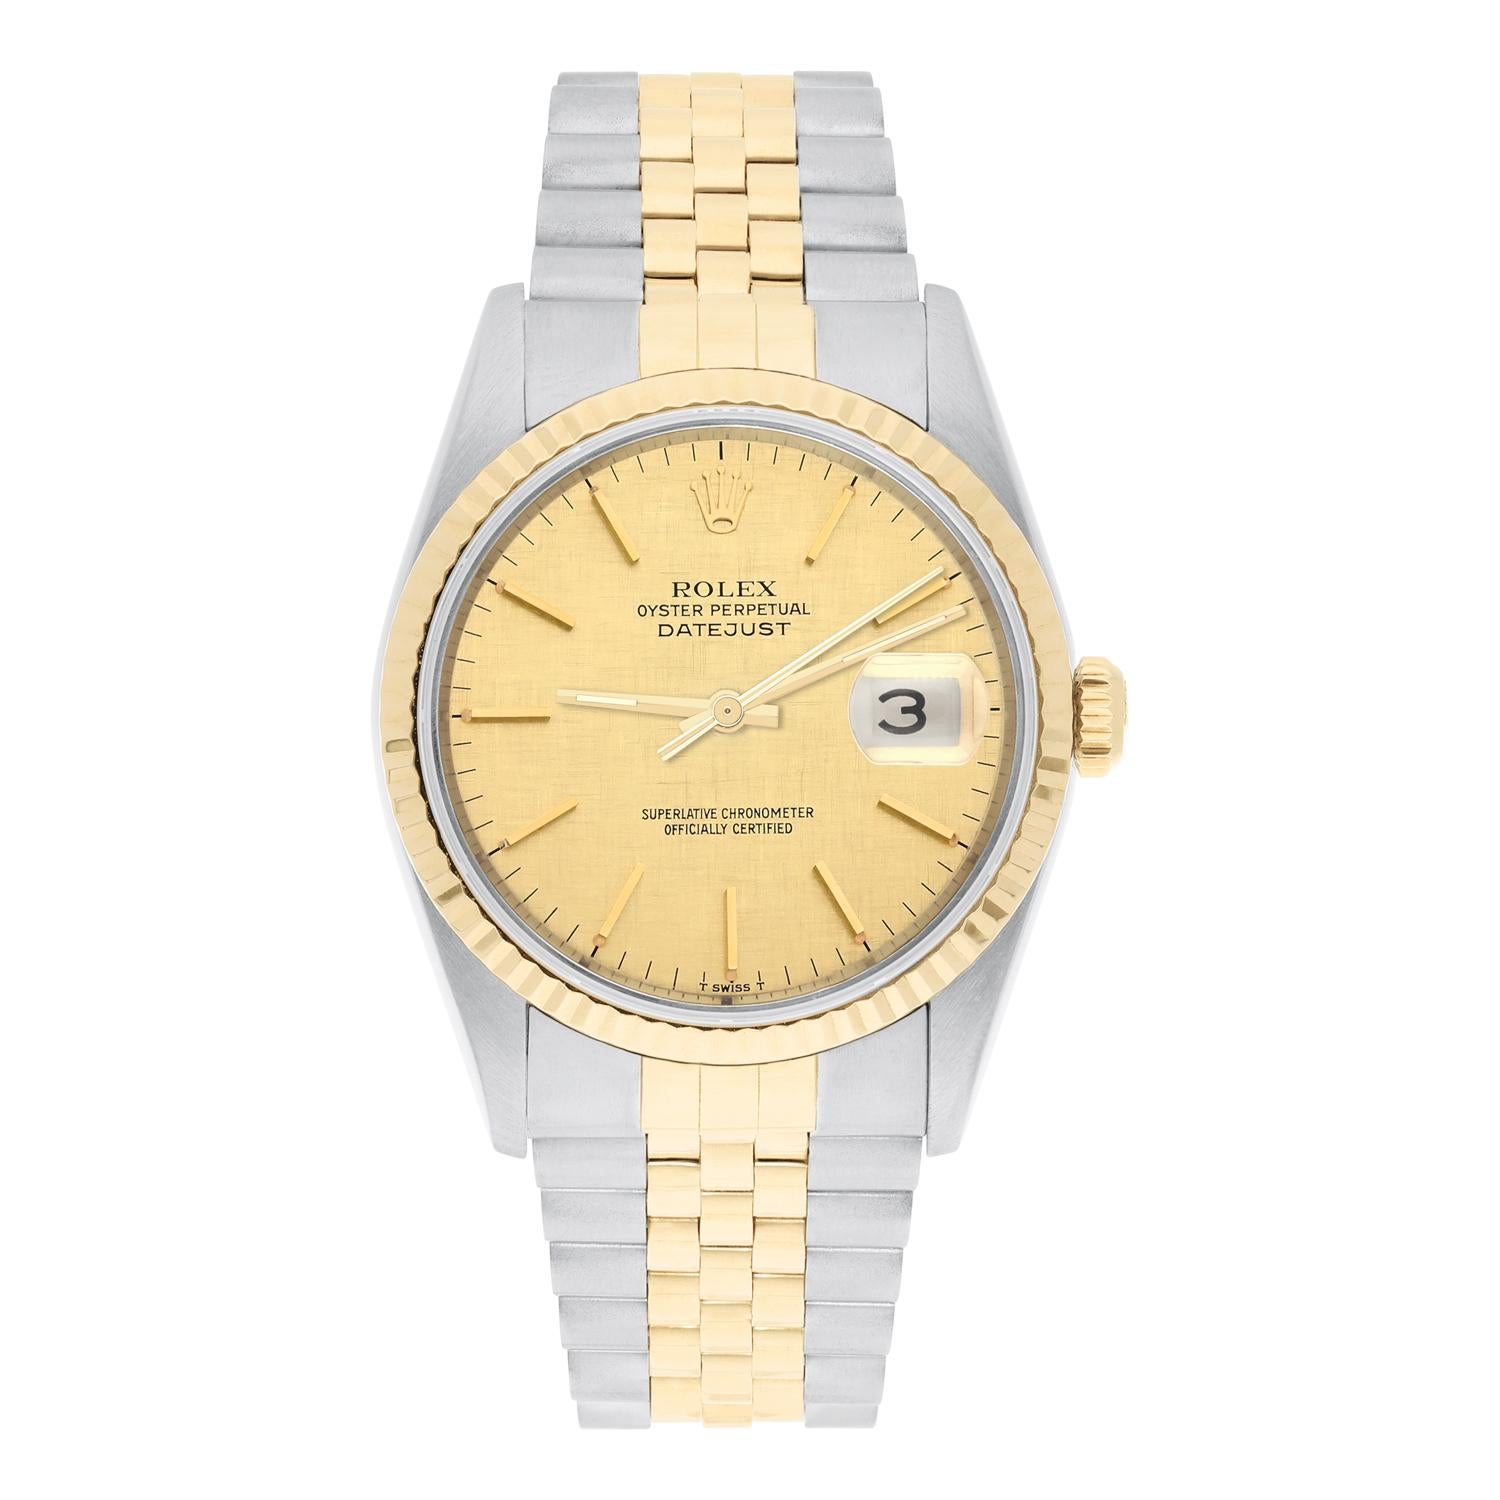 This watch has been professionally polished, serviced and is in excellent overall condition. There are absolutely no visible scratches or blemishes. Model features quick-set movement. Authenticity guaranteed! The sale comes with a new style Rolex